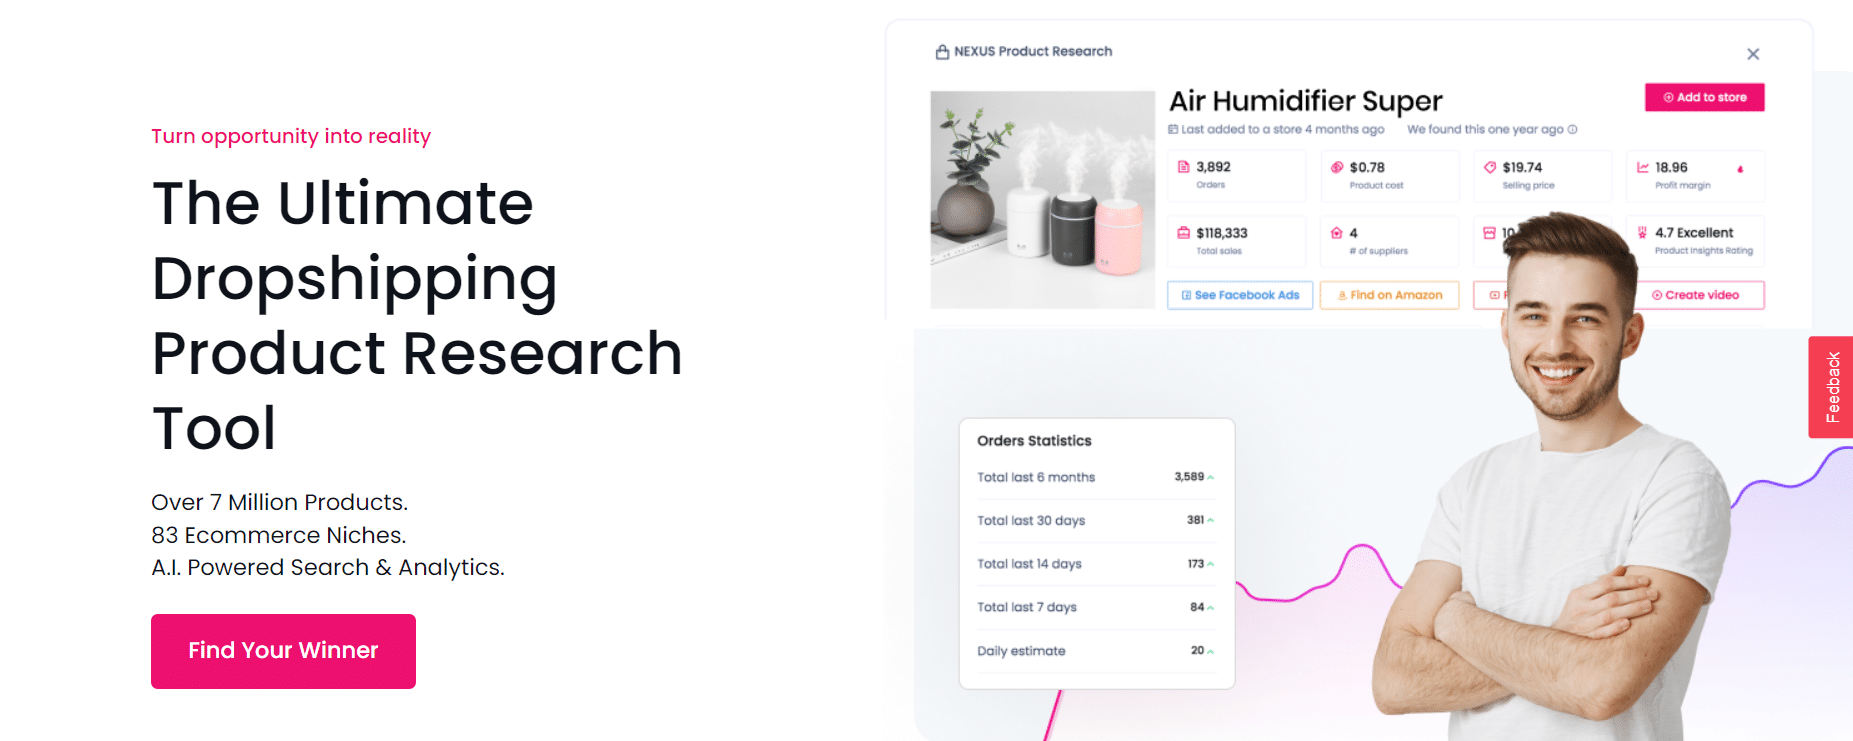 Dropshipping product research tool